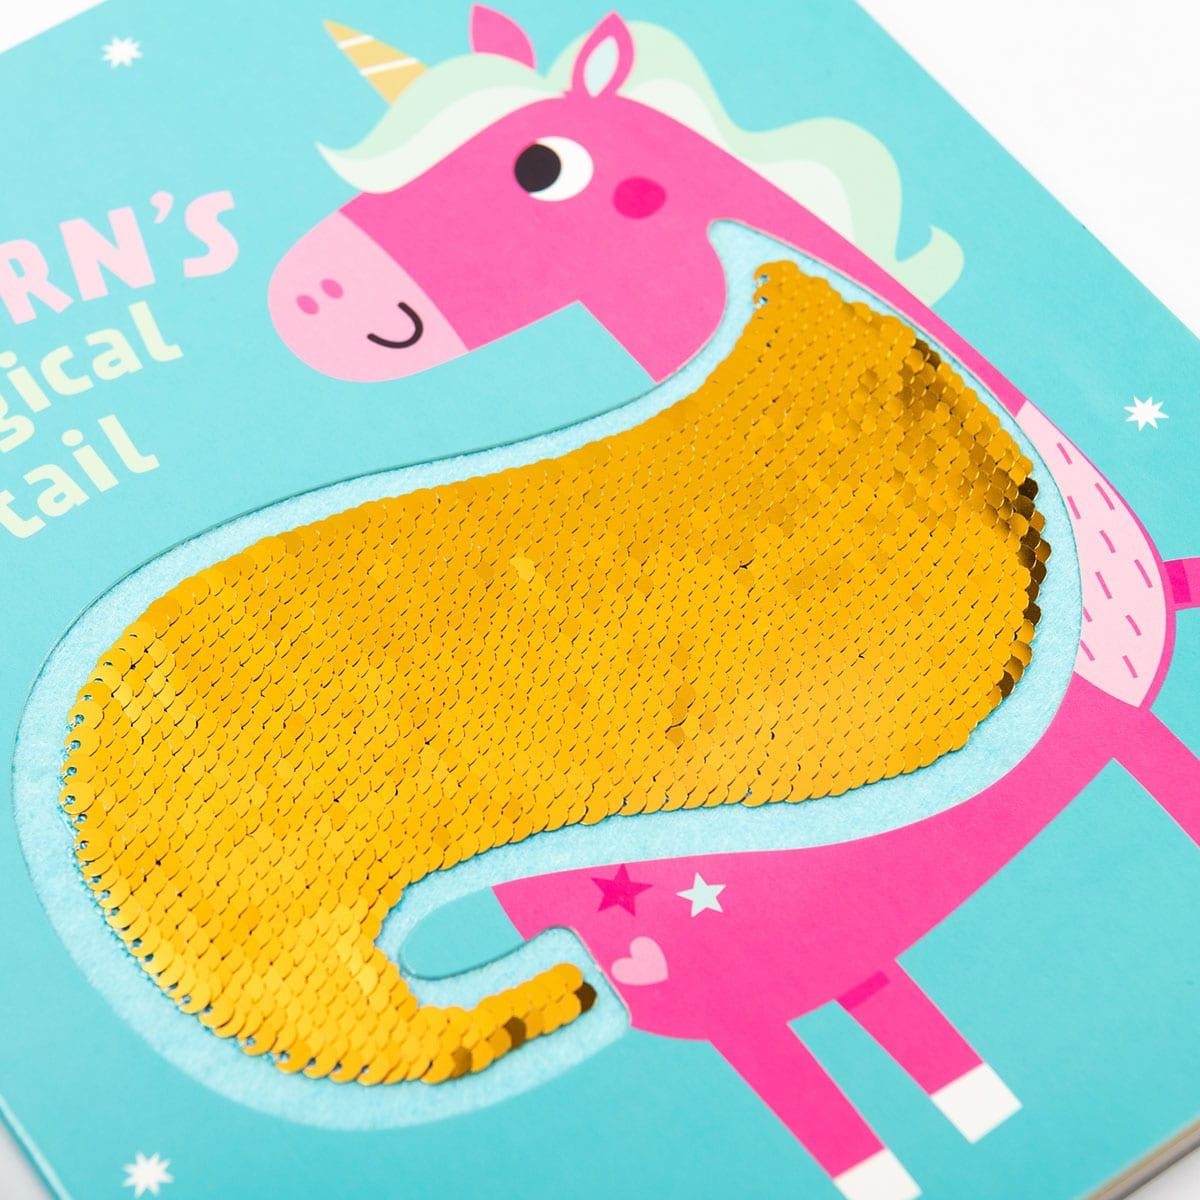 Sequins Books - The Unicorn's Magical Tail